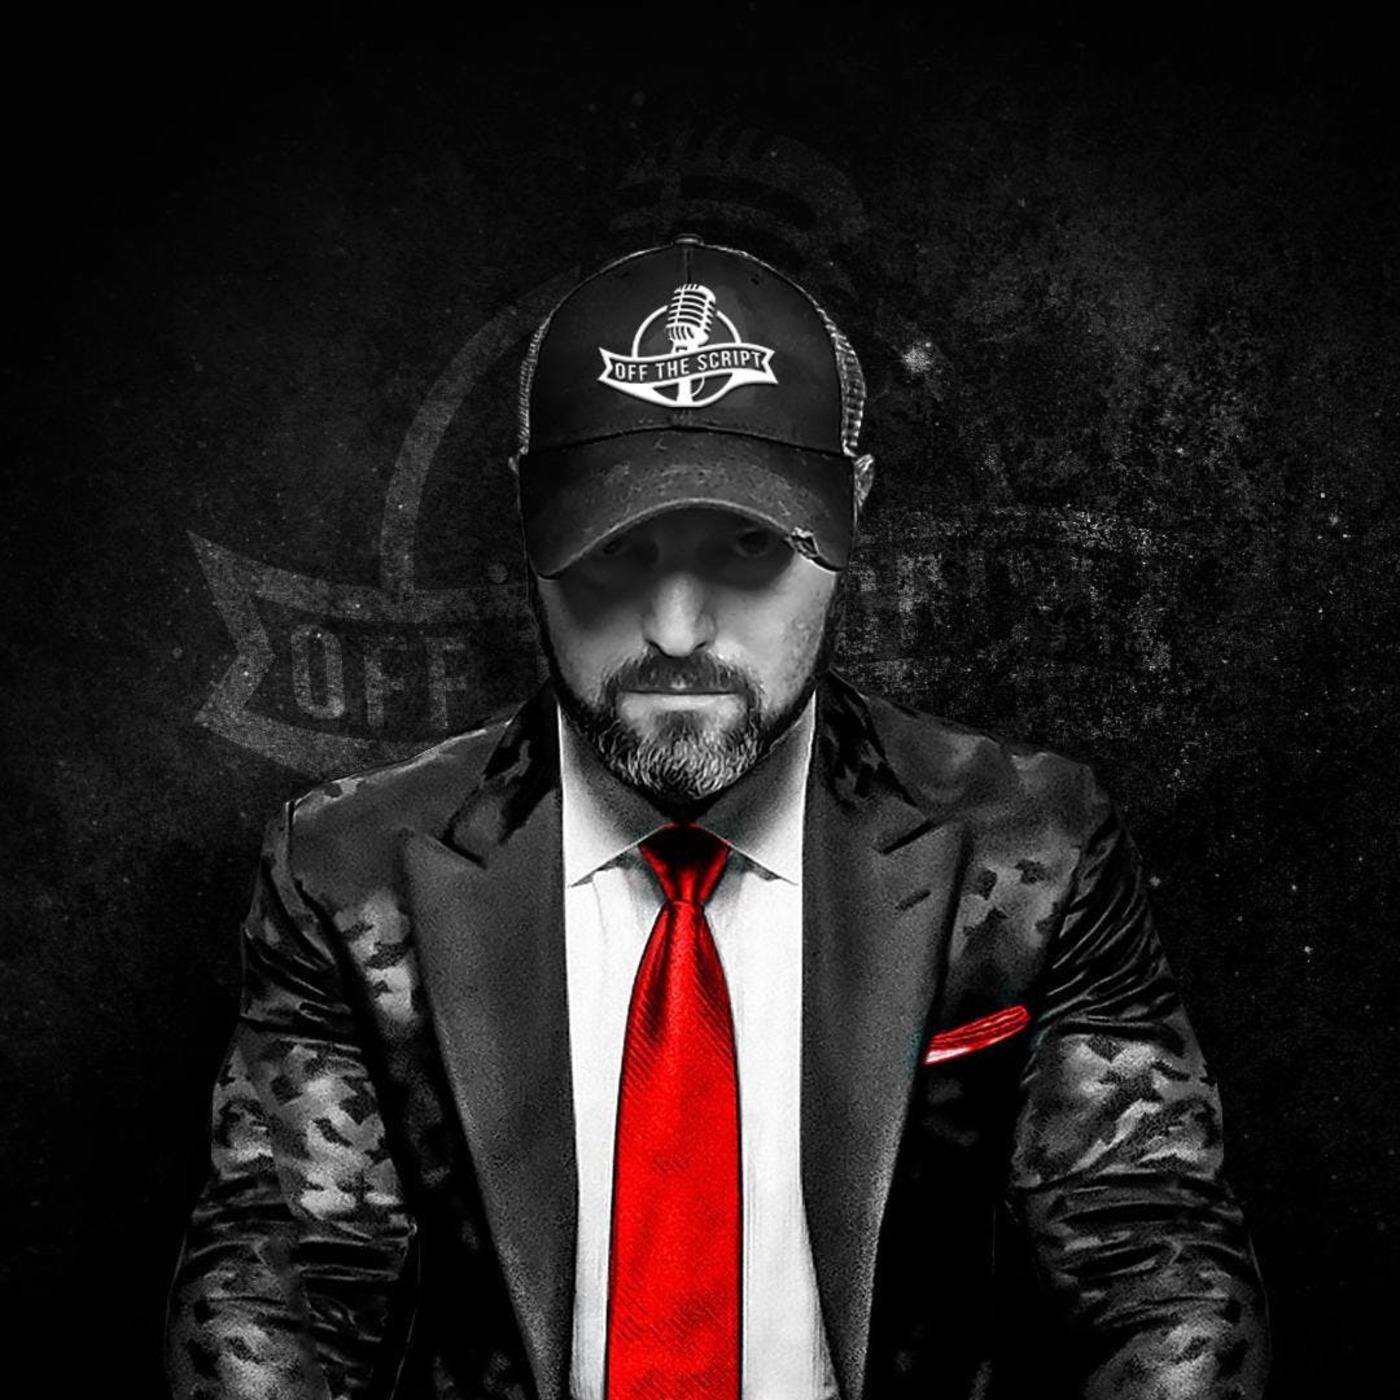 Off The Script 458 w/JDfromNY | The Potential DOOMSDAY For WWE As Vince McMahon Is Back As Chairman Of The Board, and Reportedly Will Be Taking Back Creative Control For WWE Sooner Rather Than Later.